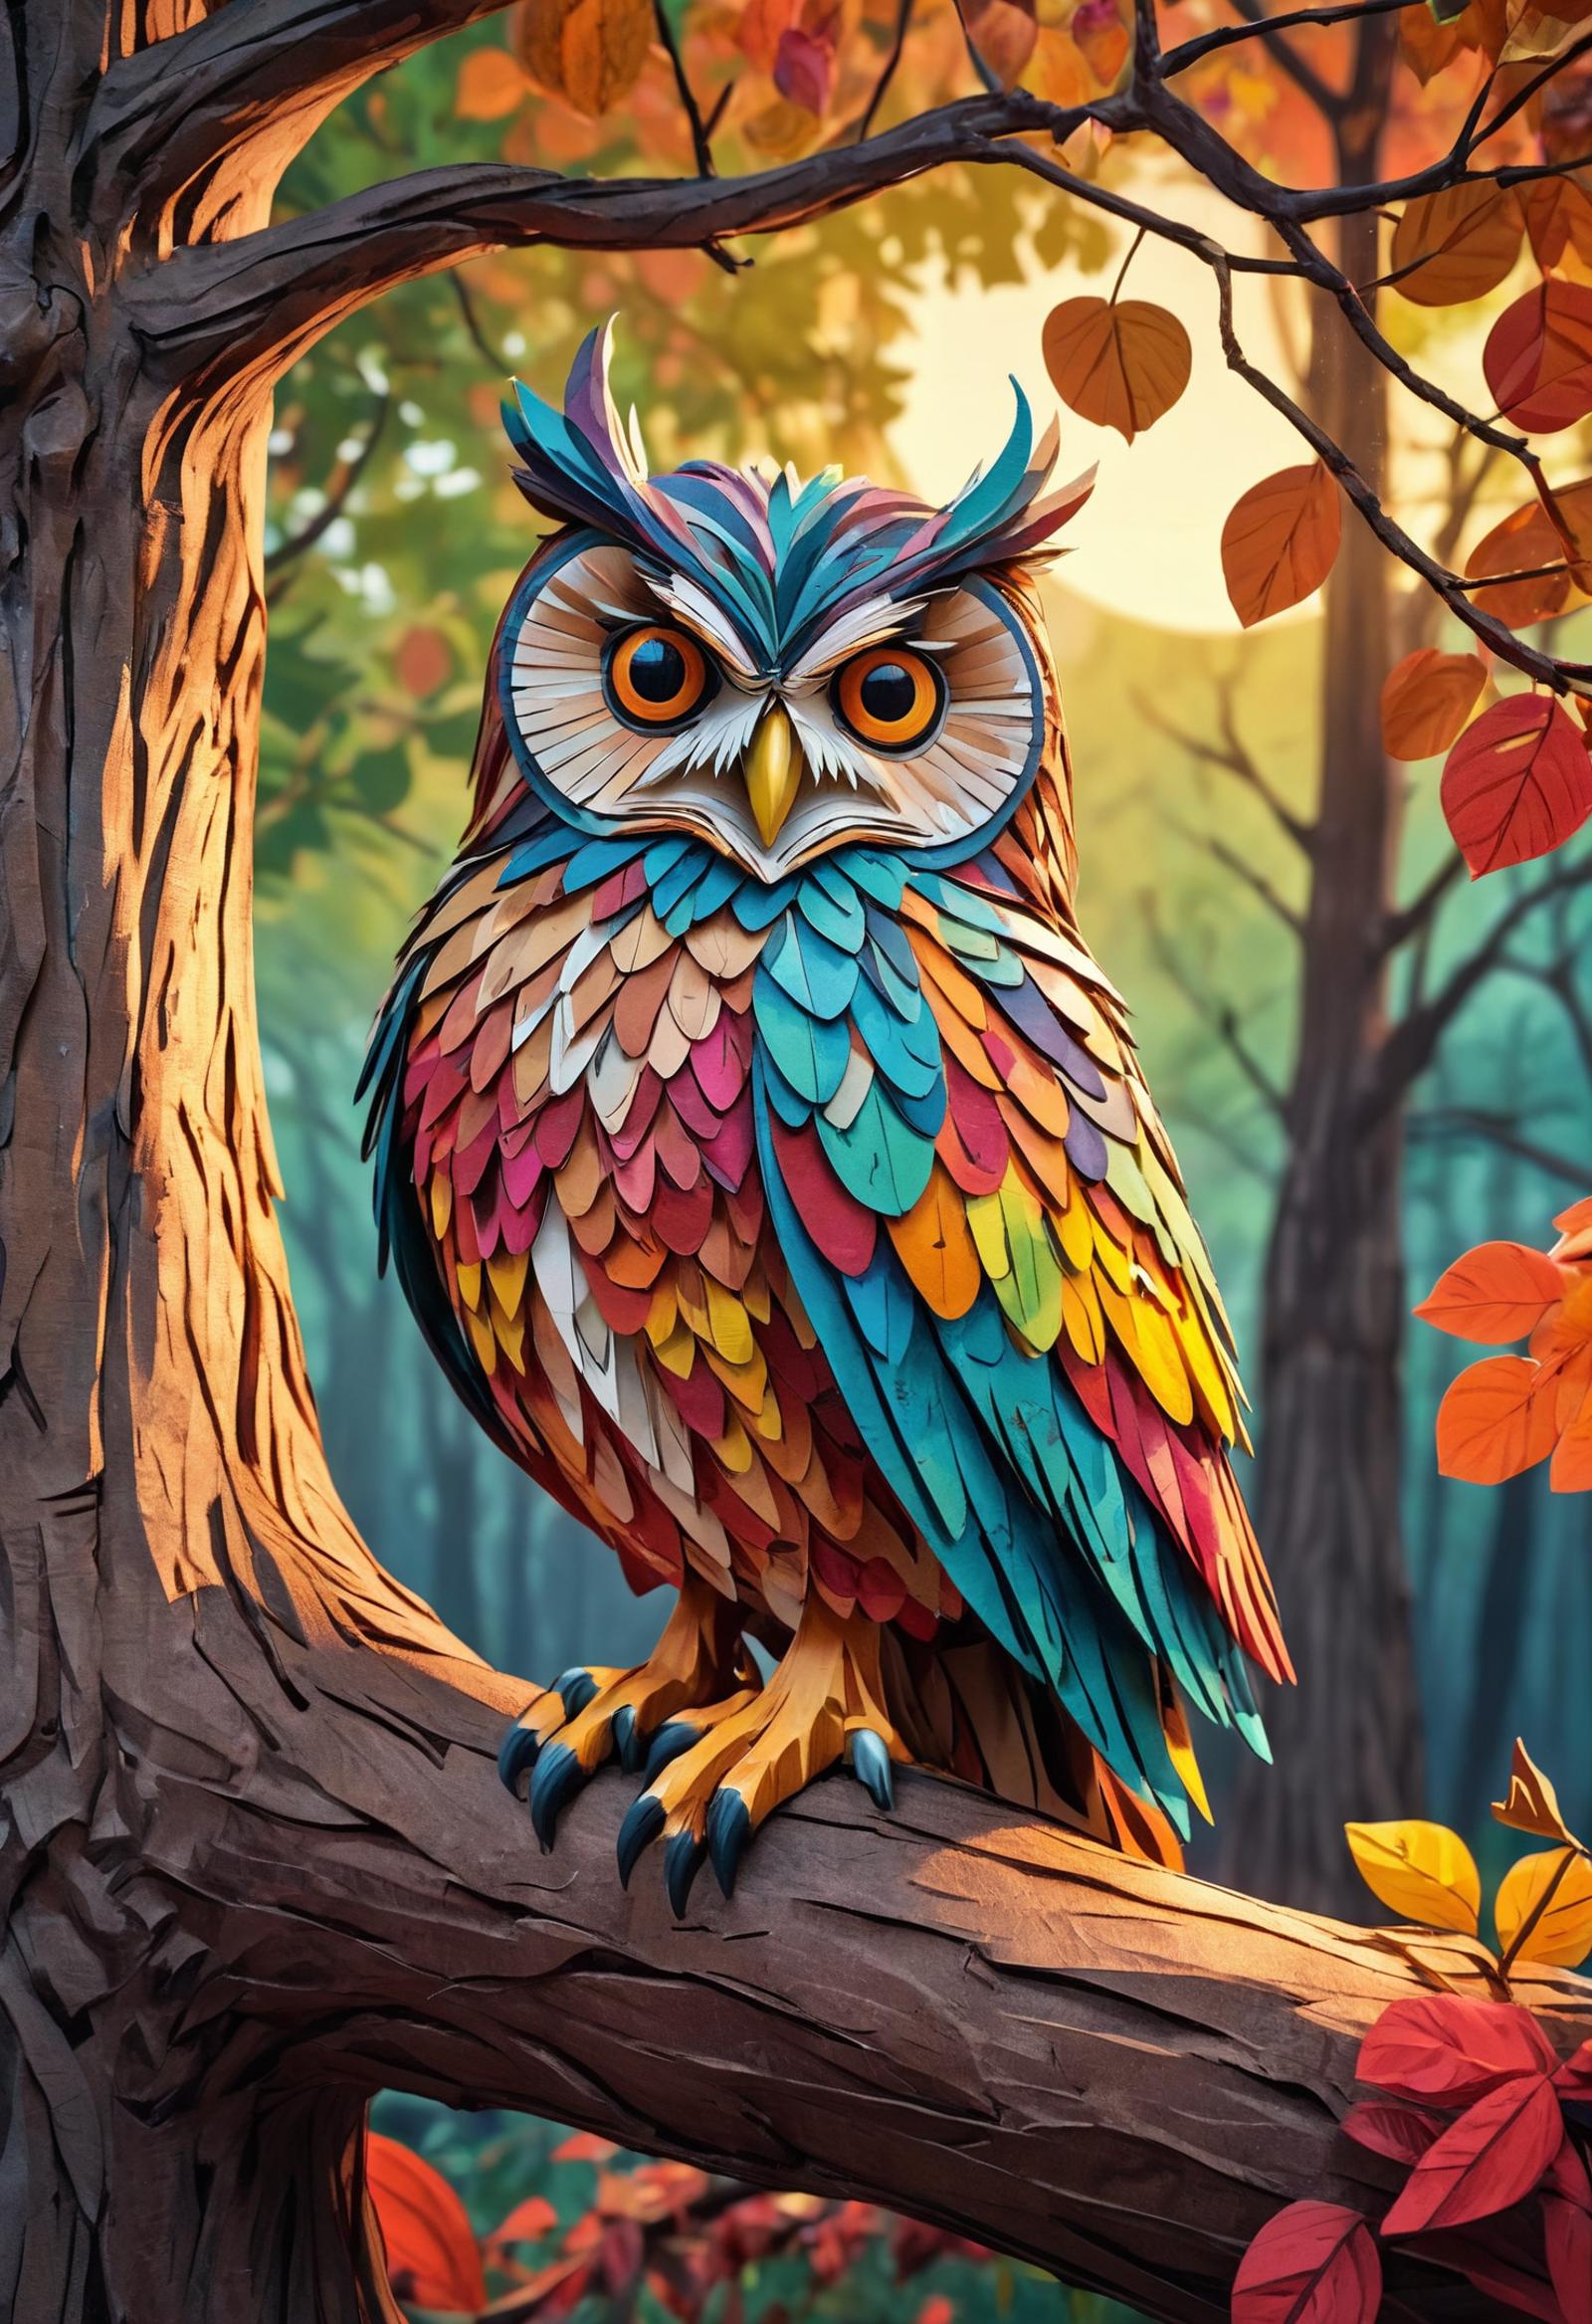 Colorful Owl Statue Perched on Tree Branch Among Autumn Leaves